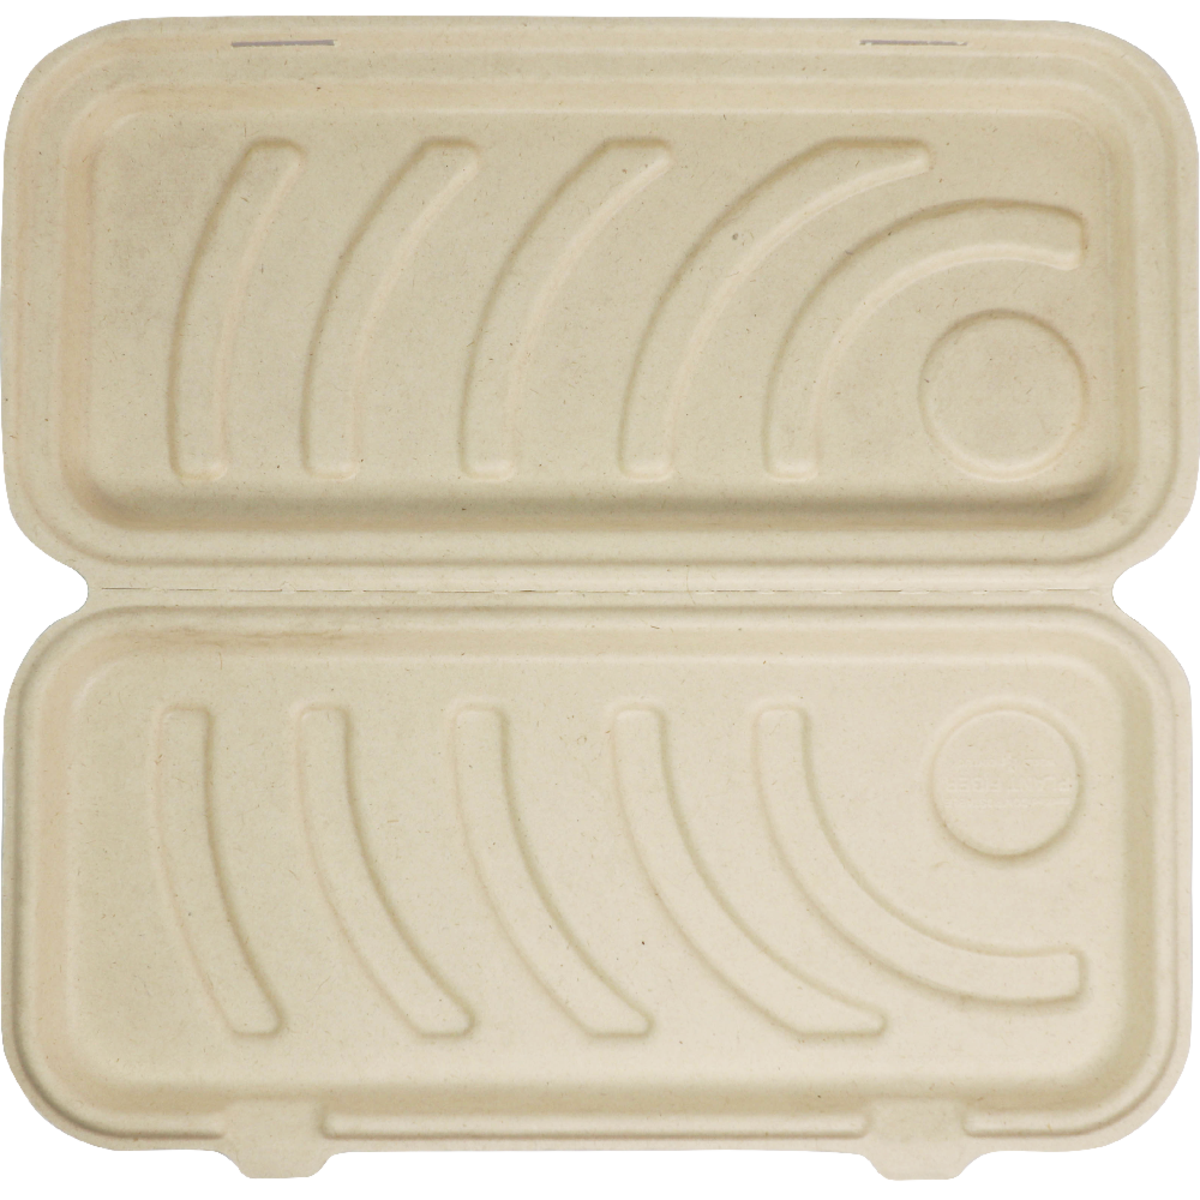 Pulp Tek 43 oz Rectangle Natural Bagasse To Go Tray - 5-Compartment - 11 x  8 1/2 x 1 1/2 - 100 count box